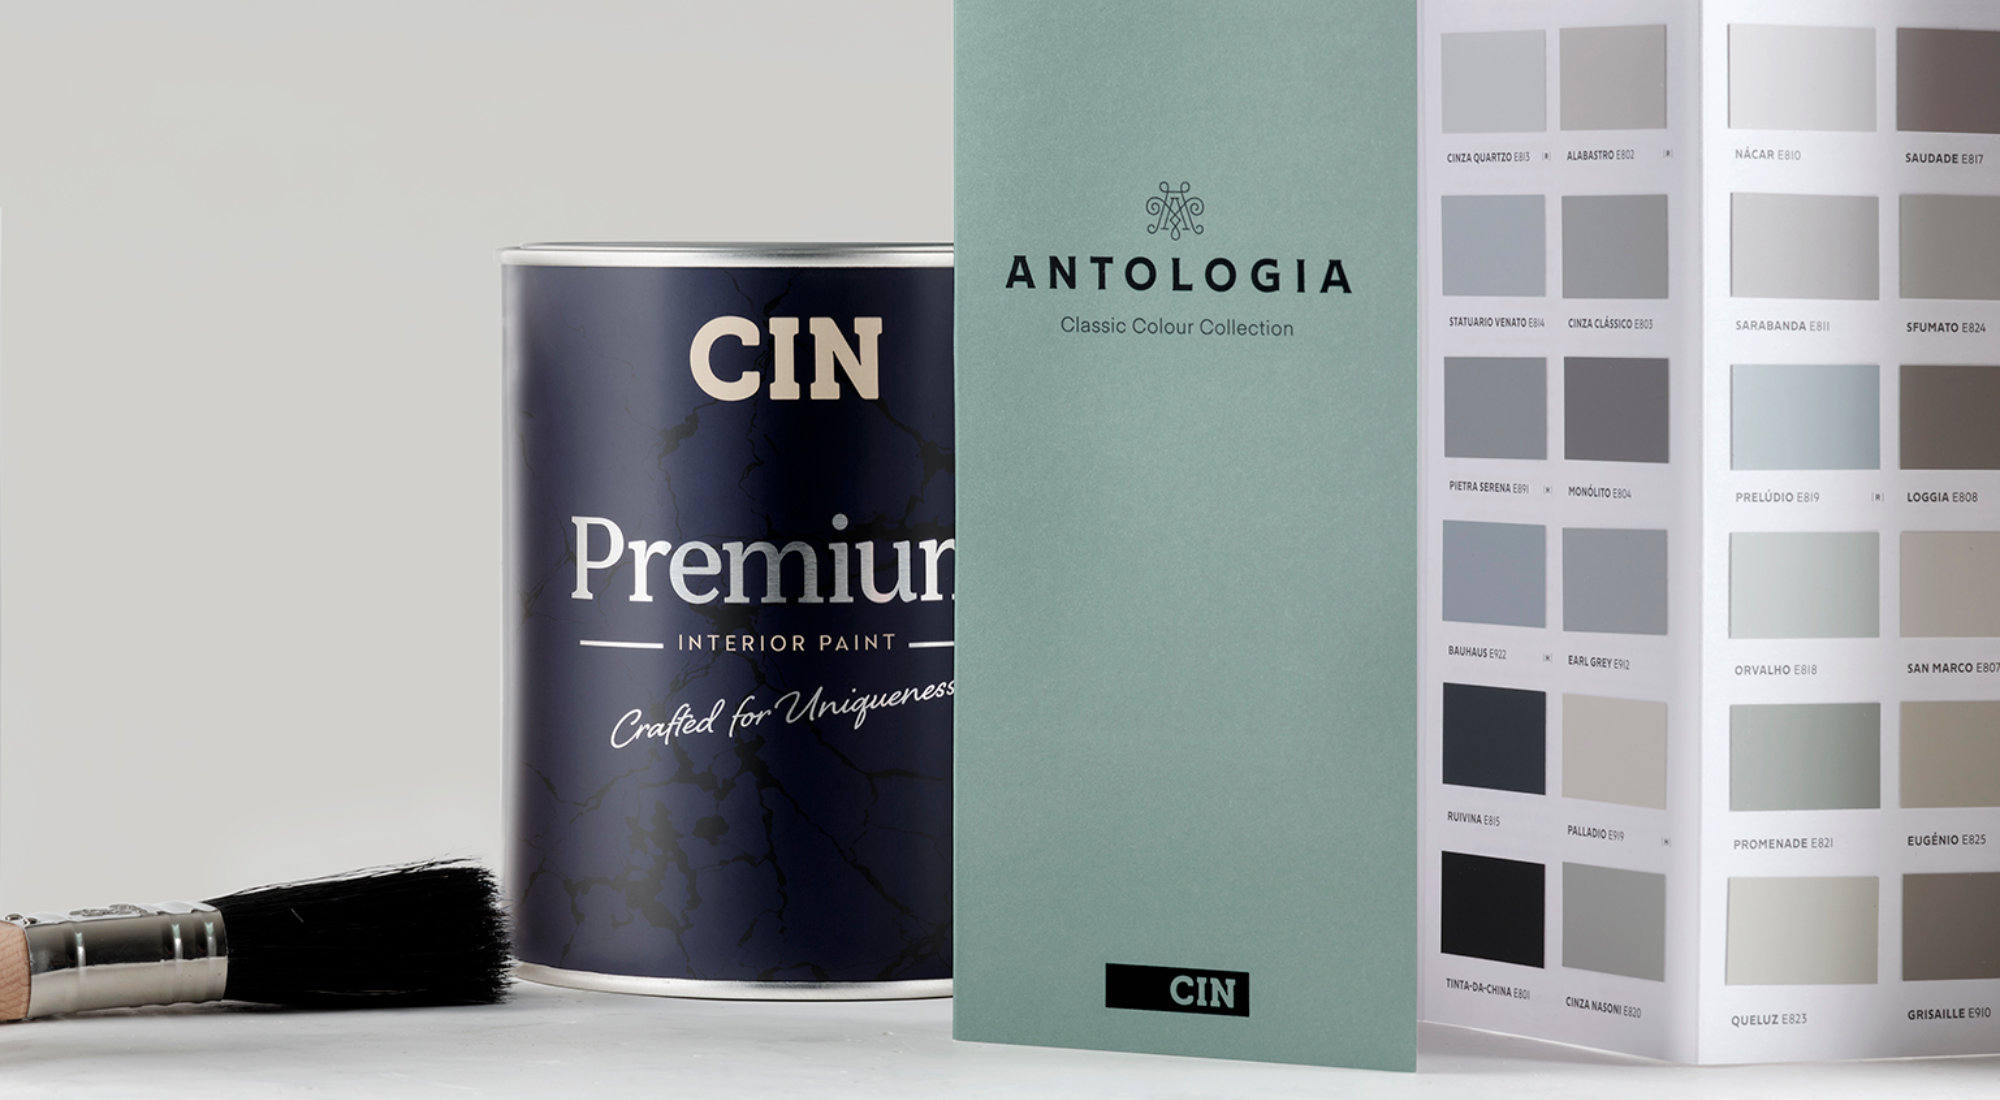 History and Future blend in CIN's best paint